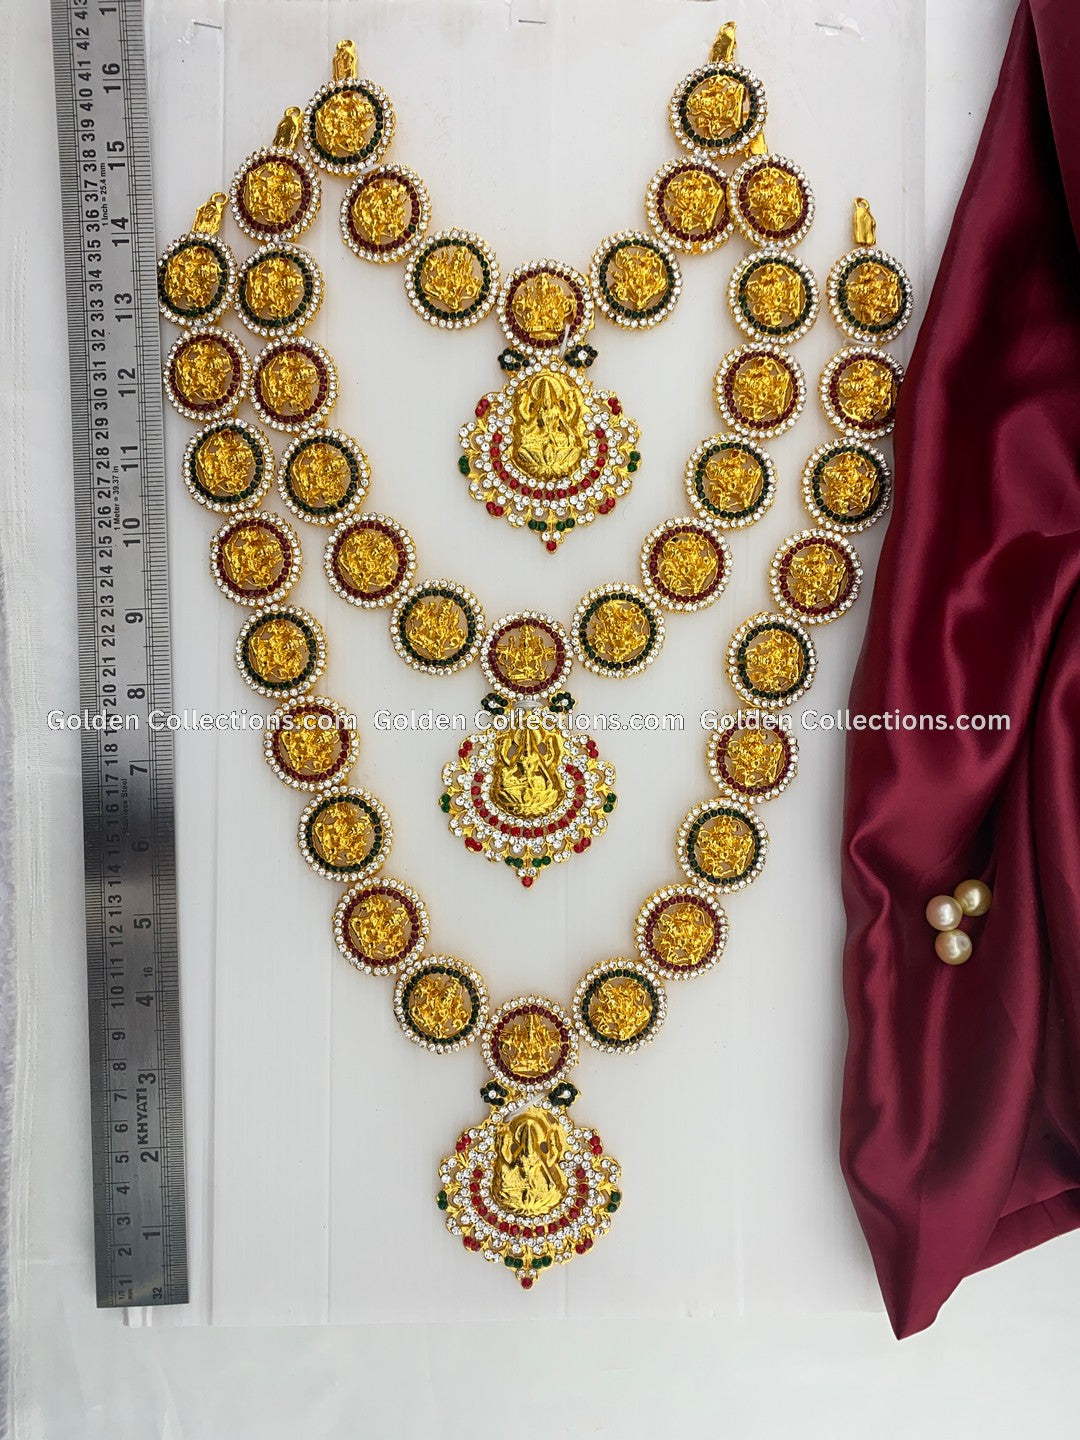 Amman Temple Jewellery Online - GoldenCollections DLN-007 2